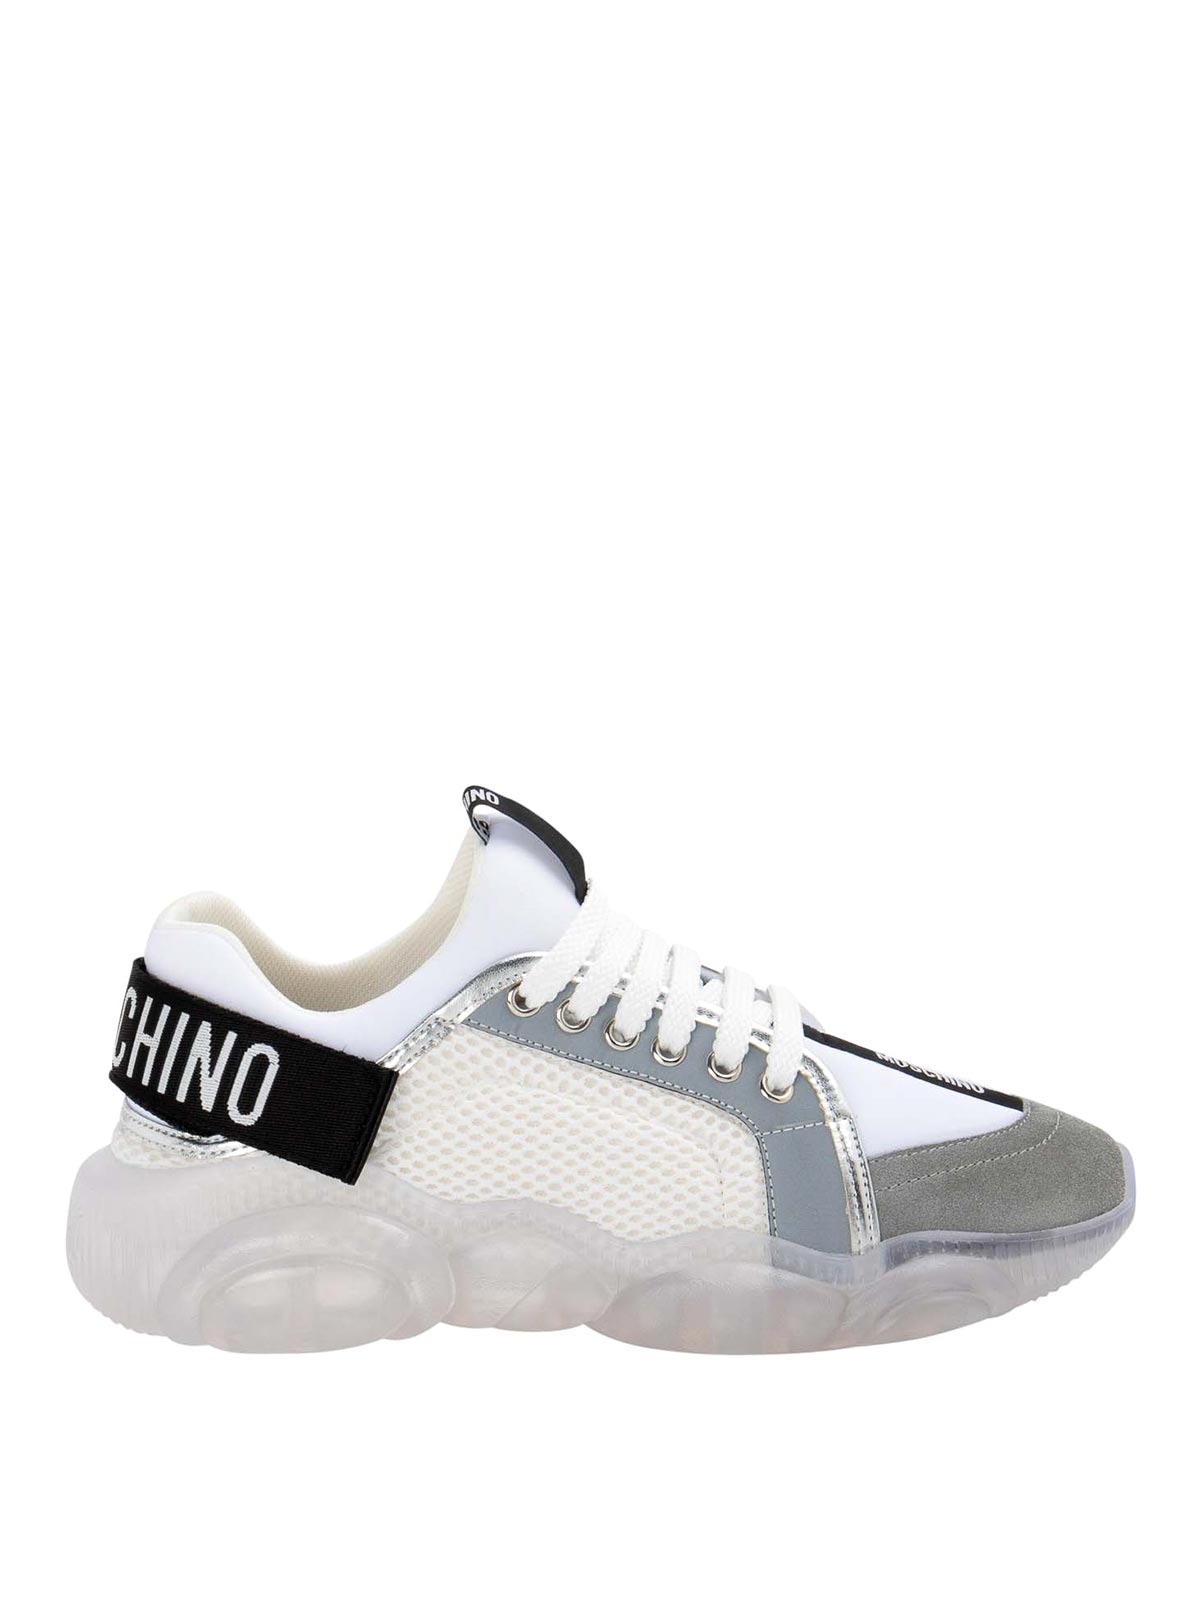 Moschino Logo Sneakers In Blanco